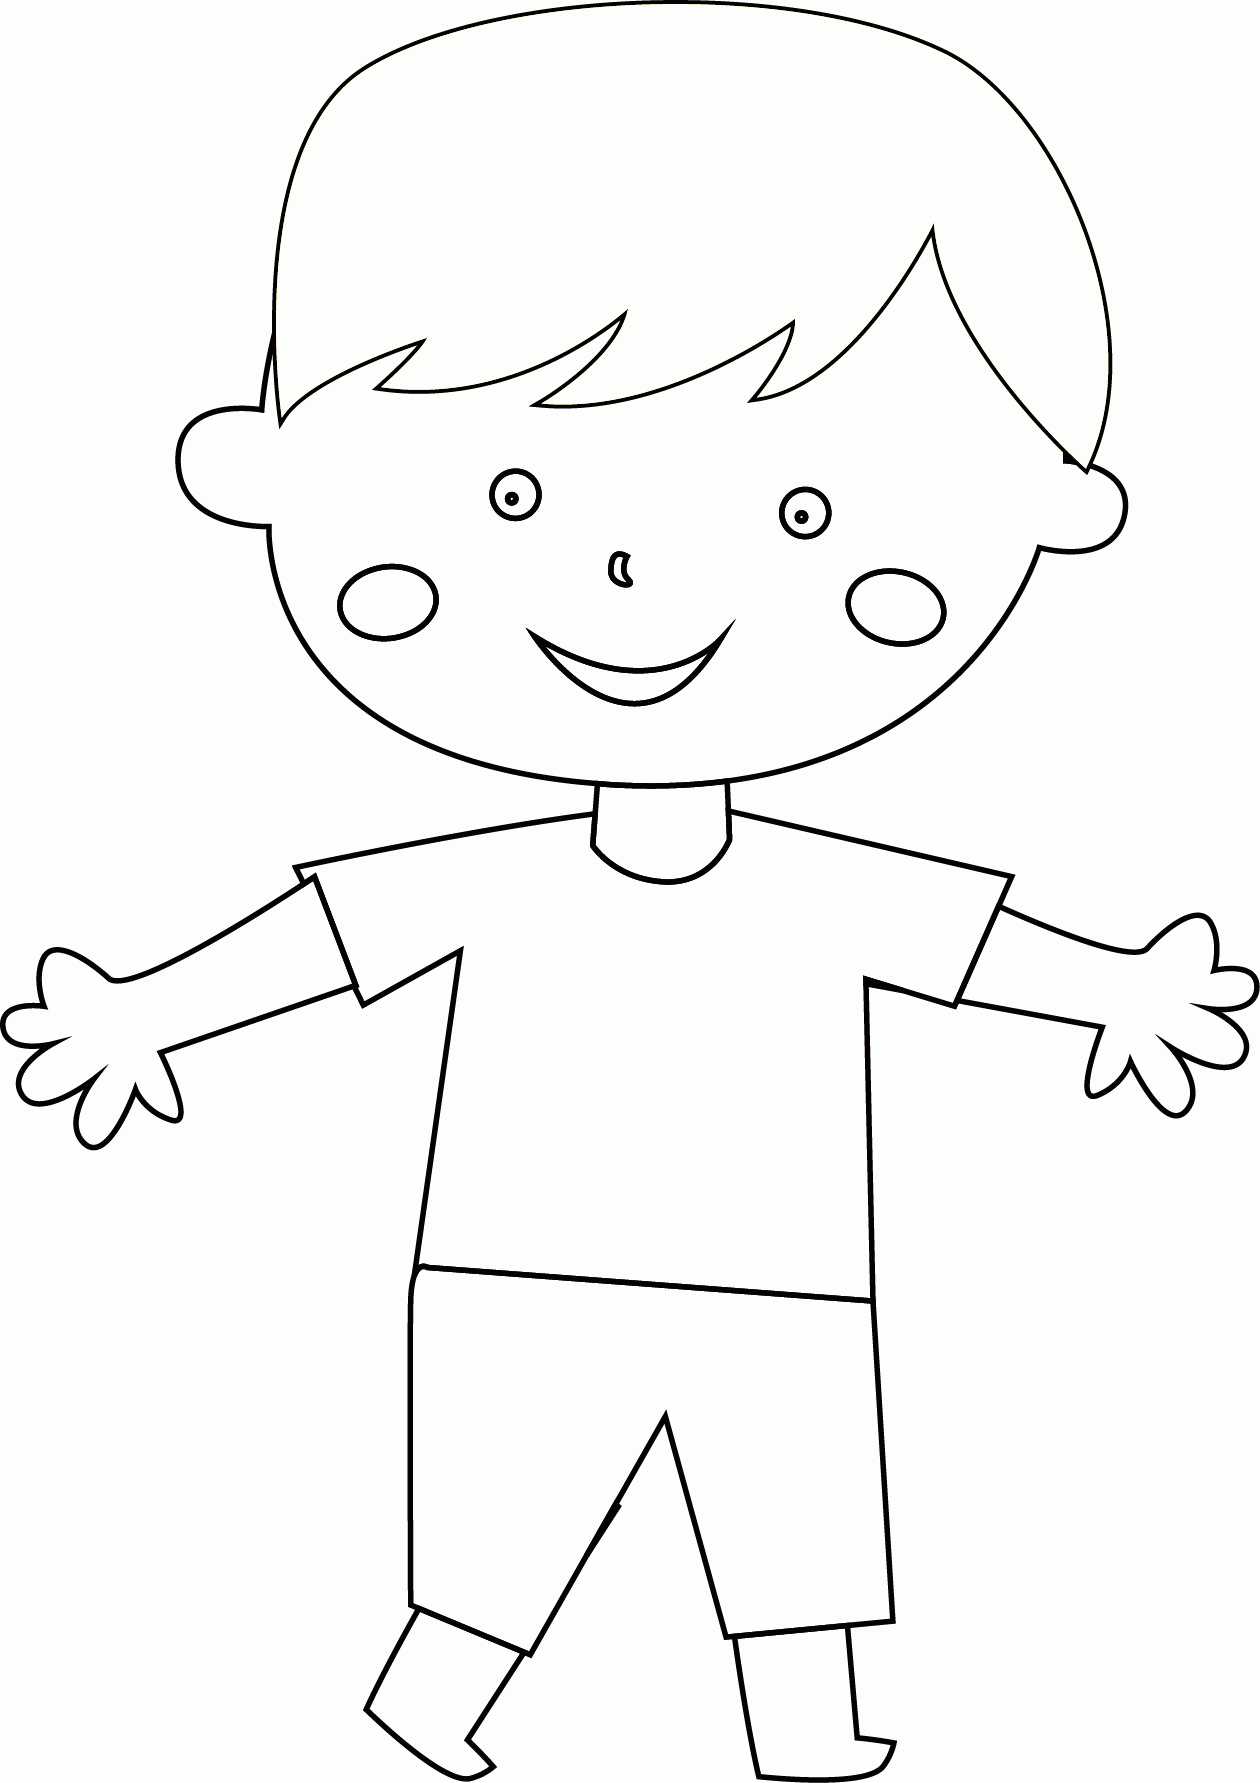 Child Boy Coloring Page 05 | Wecoloringpage